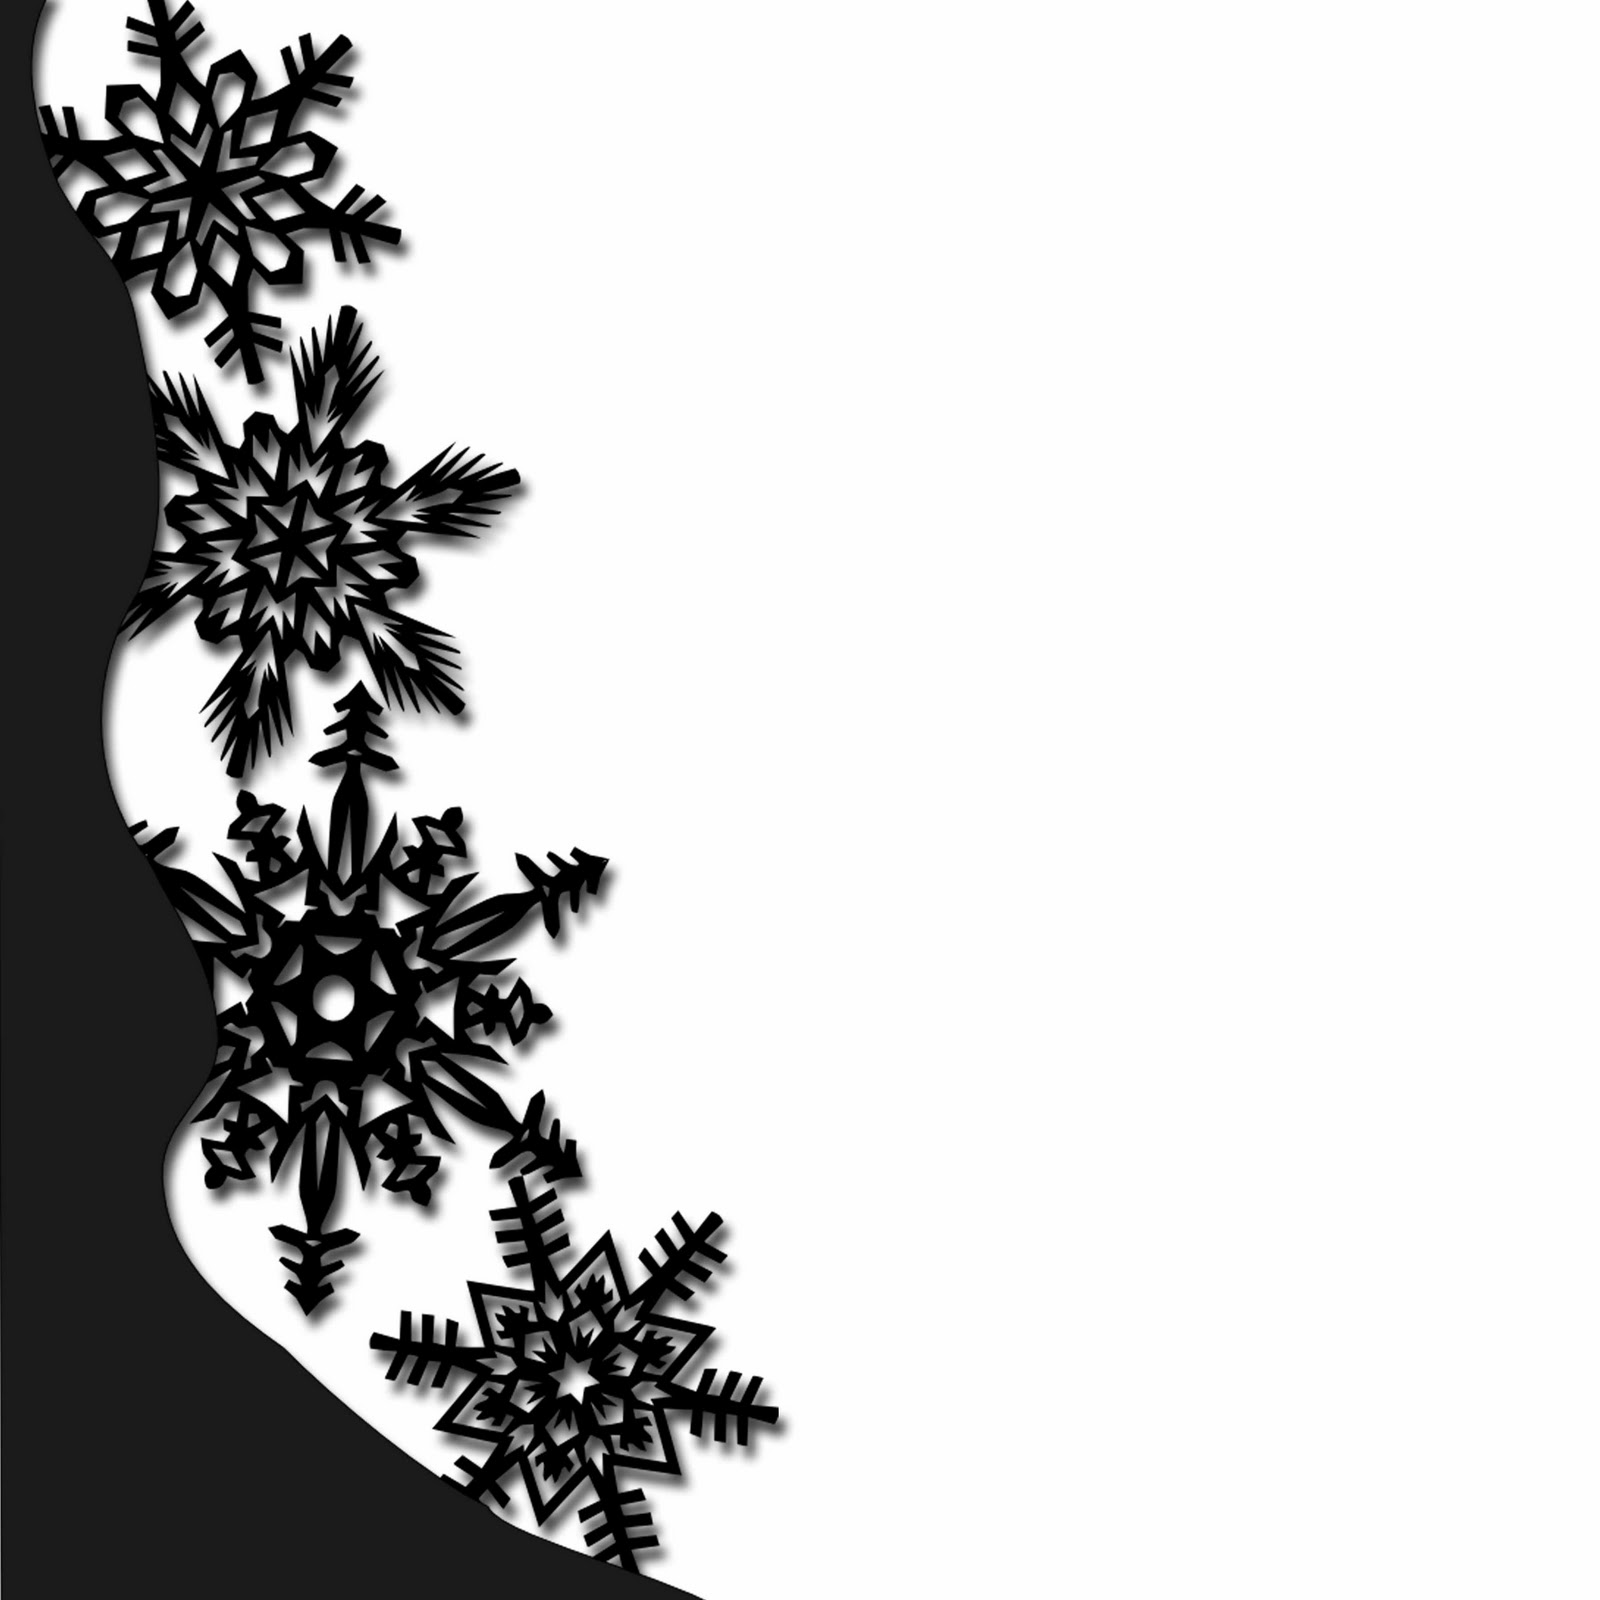 The Joy of Scrapbooking: A digi Snowflake border for your winter ...